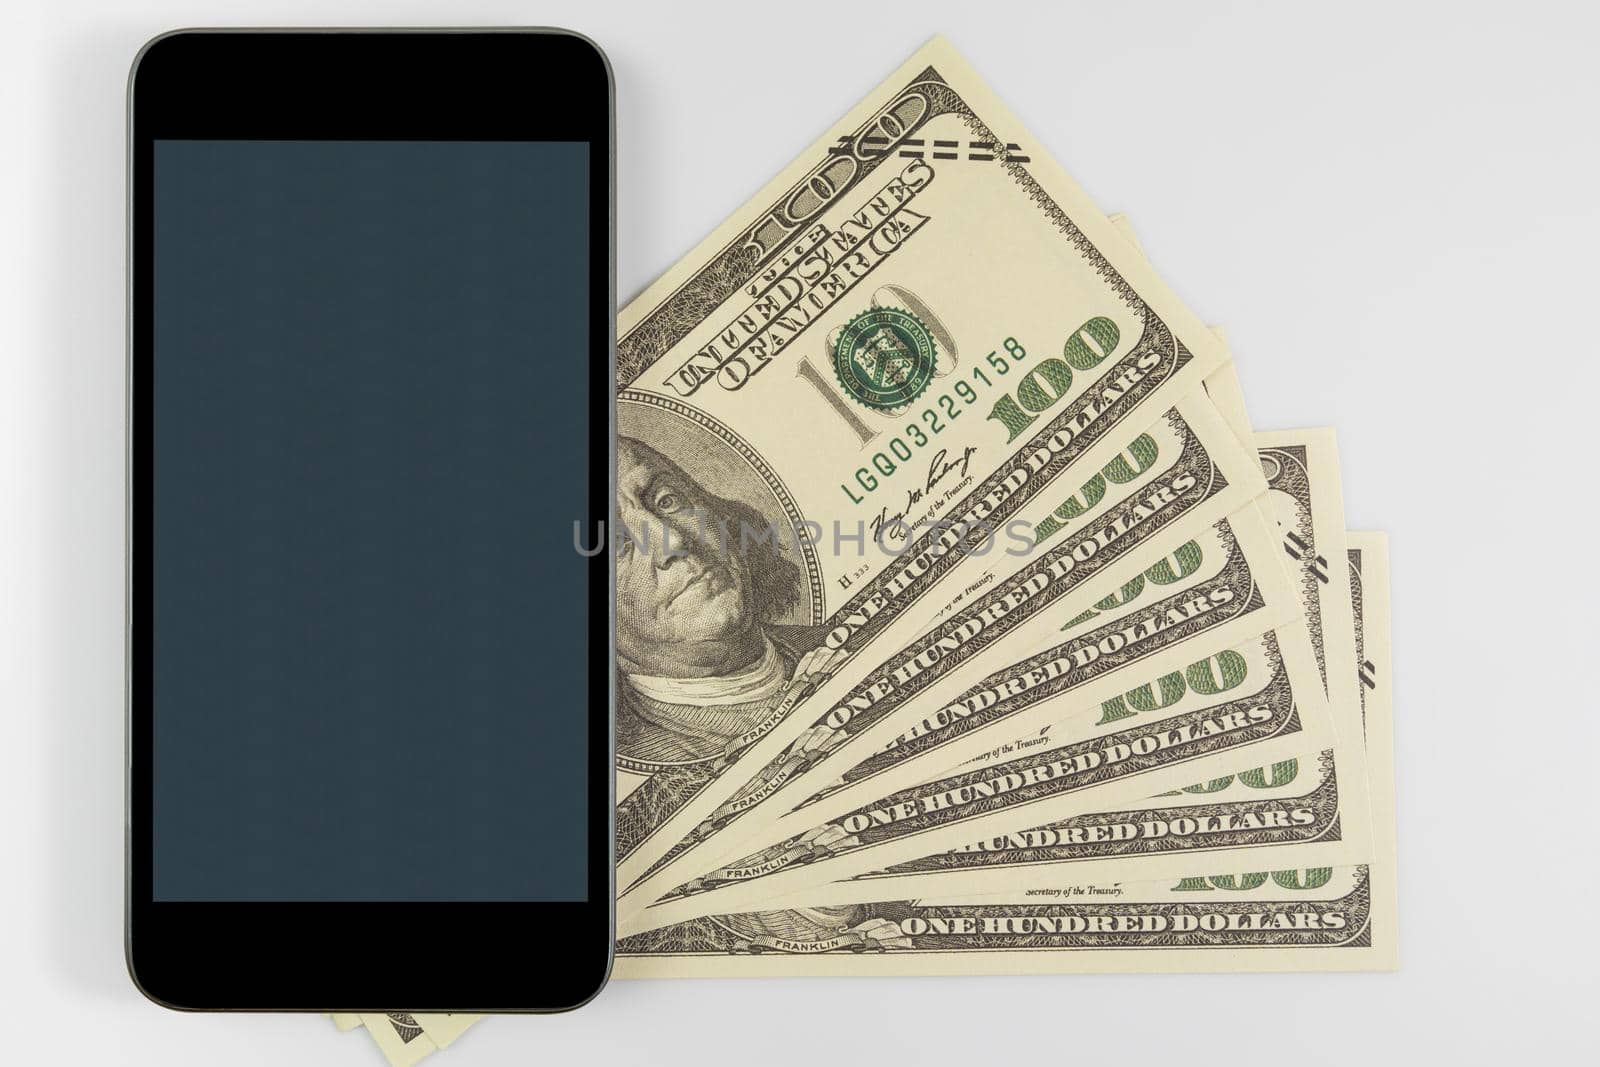 Close up Smartphone on US banknotes of one hundred dollars